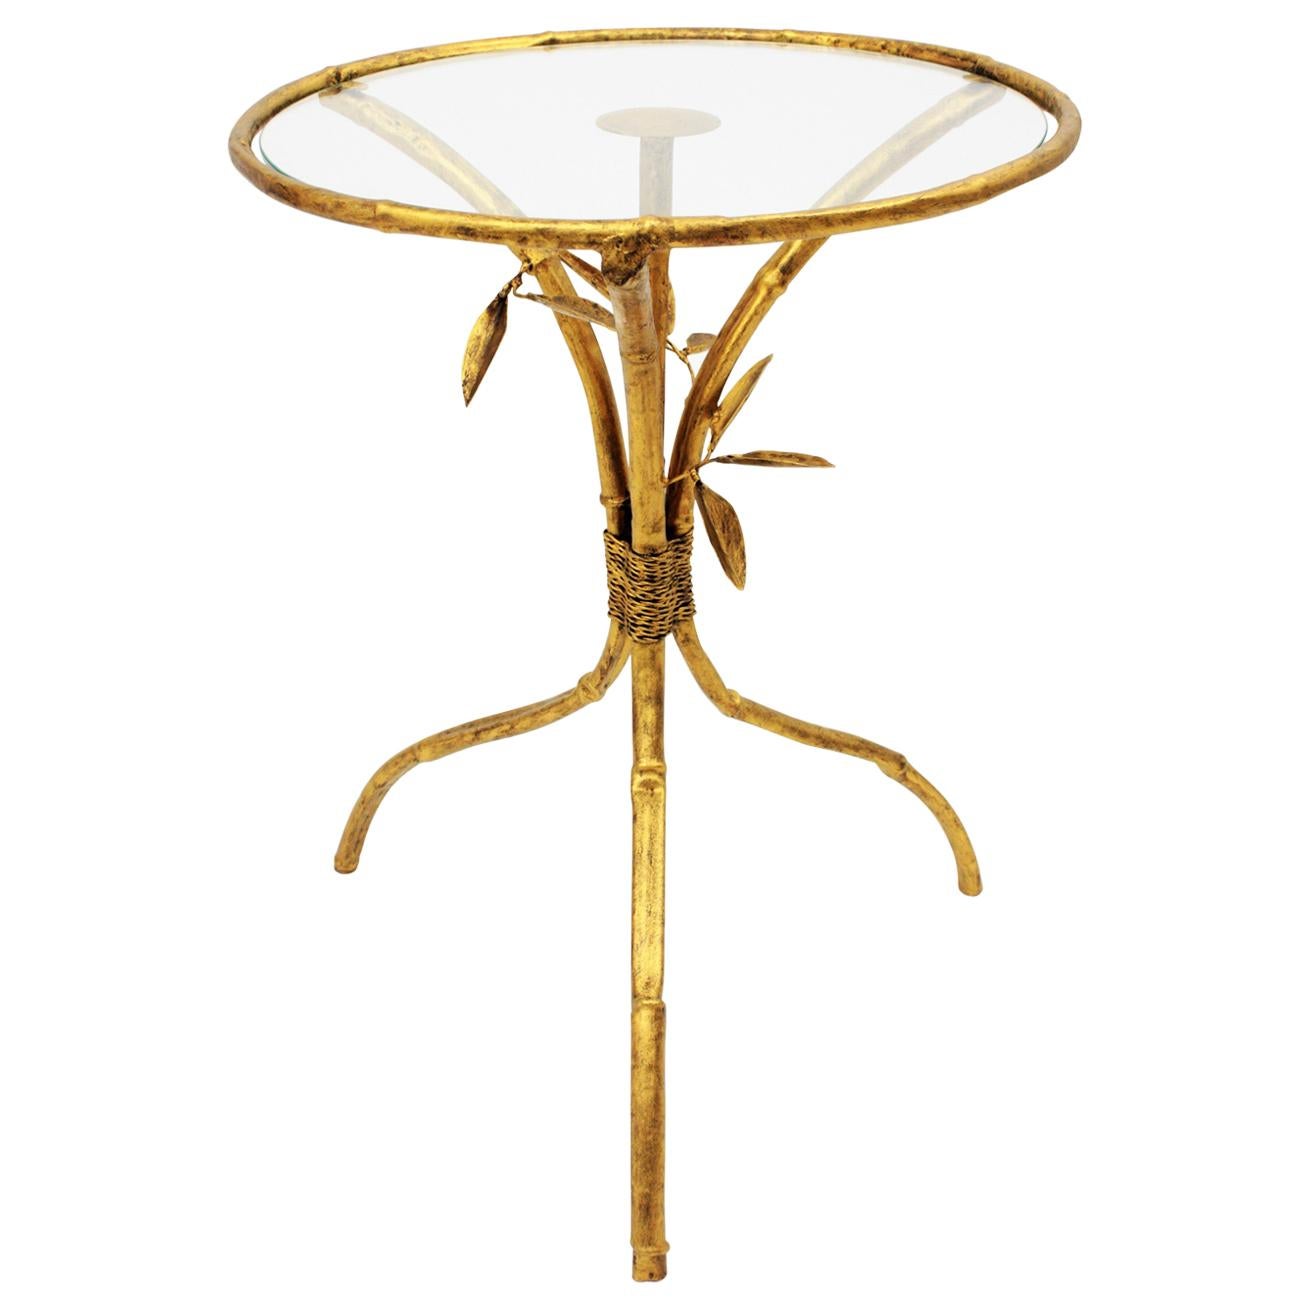 Spanish Faux Bamboo Gilt Iron Round Side Table or Drinks Table, 1950s